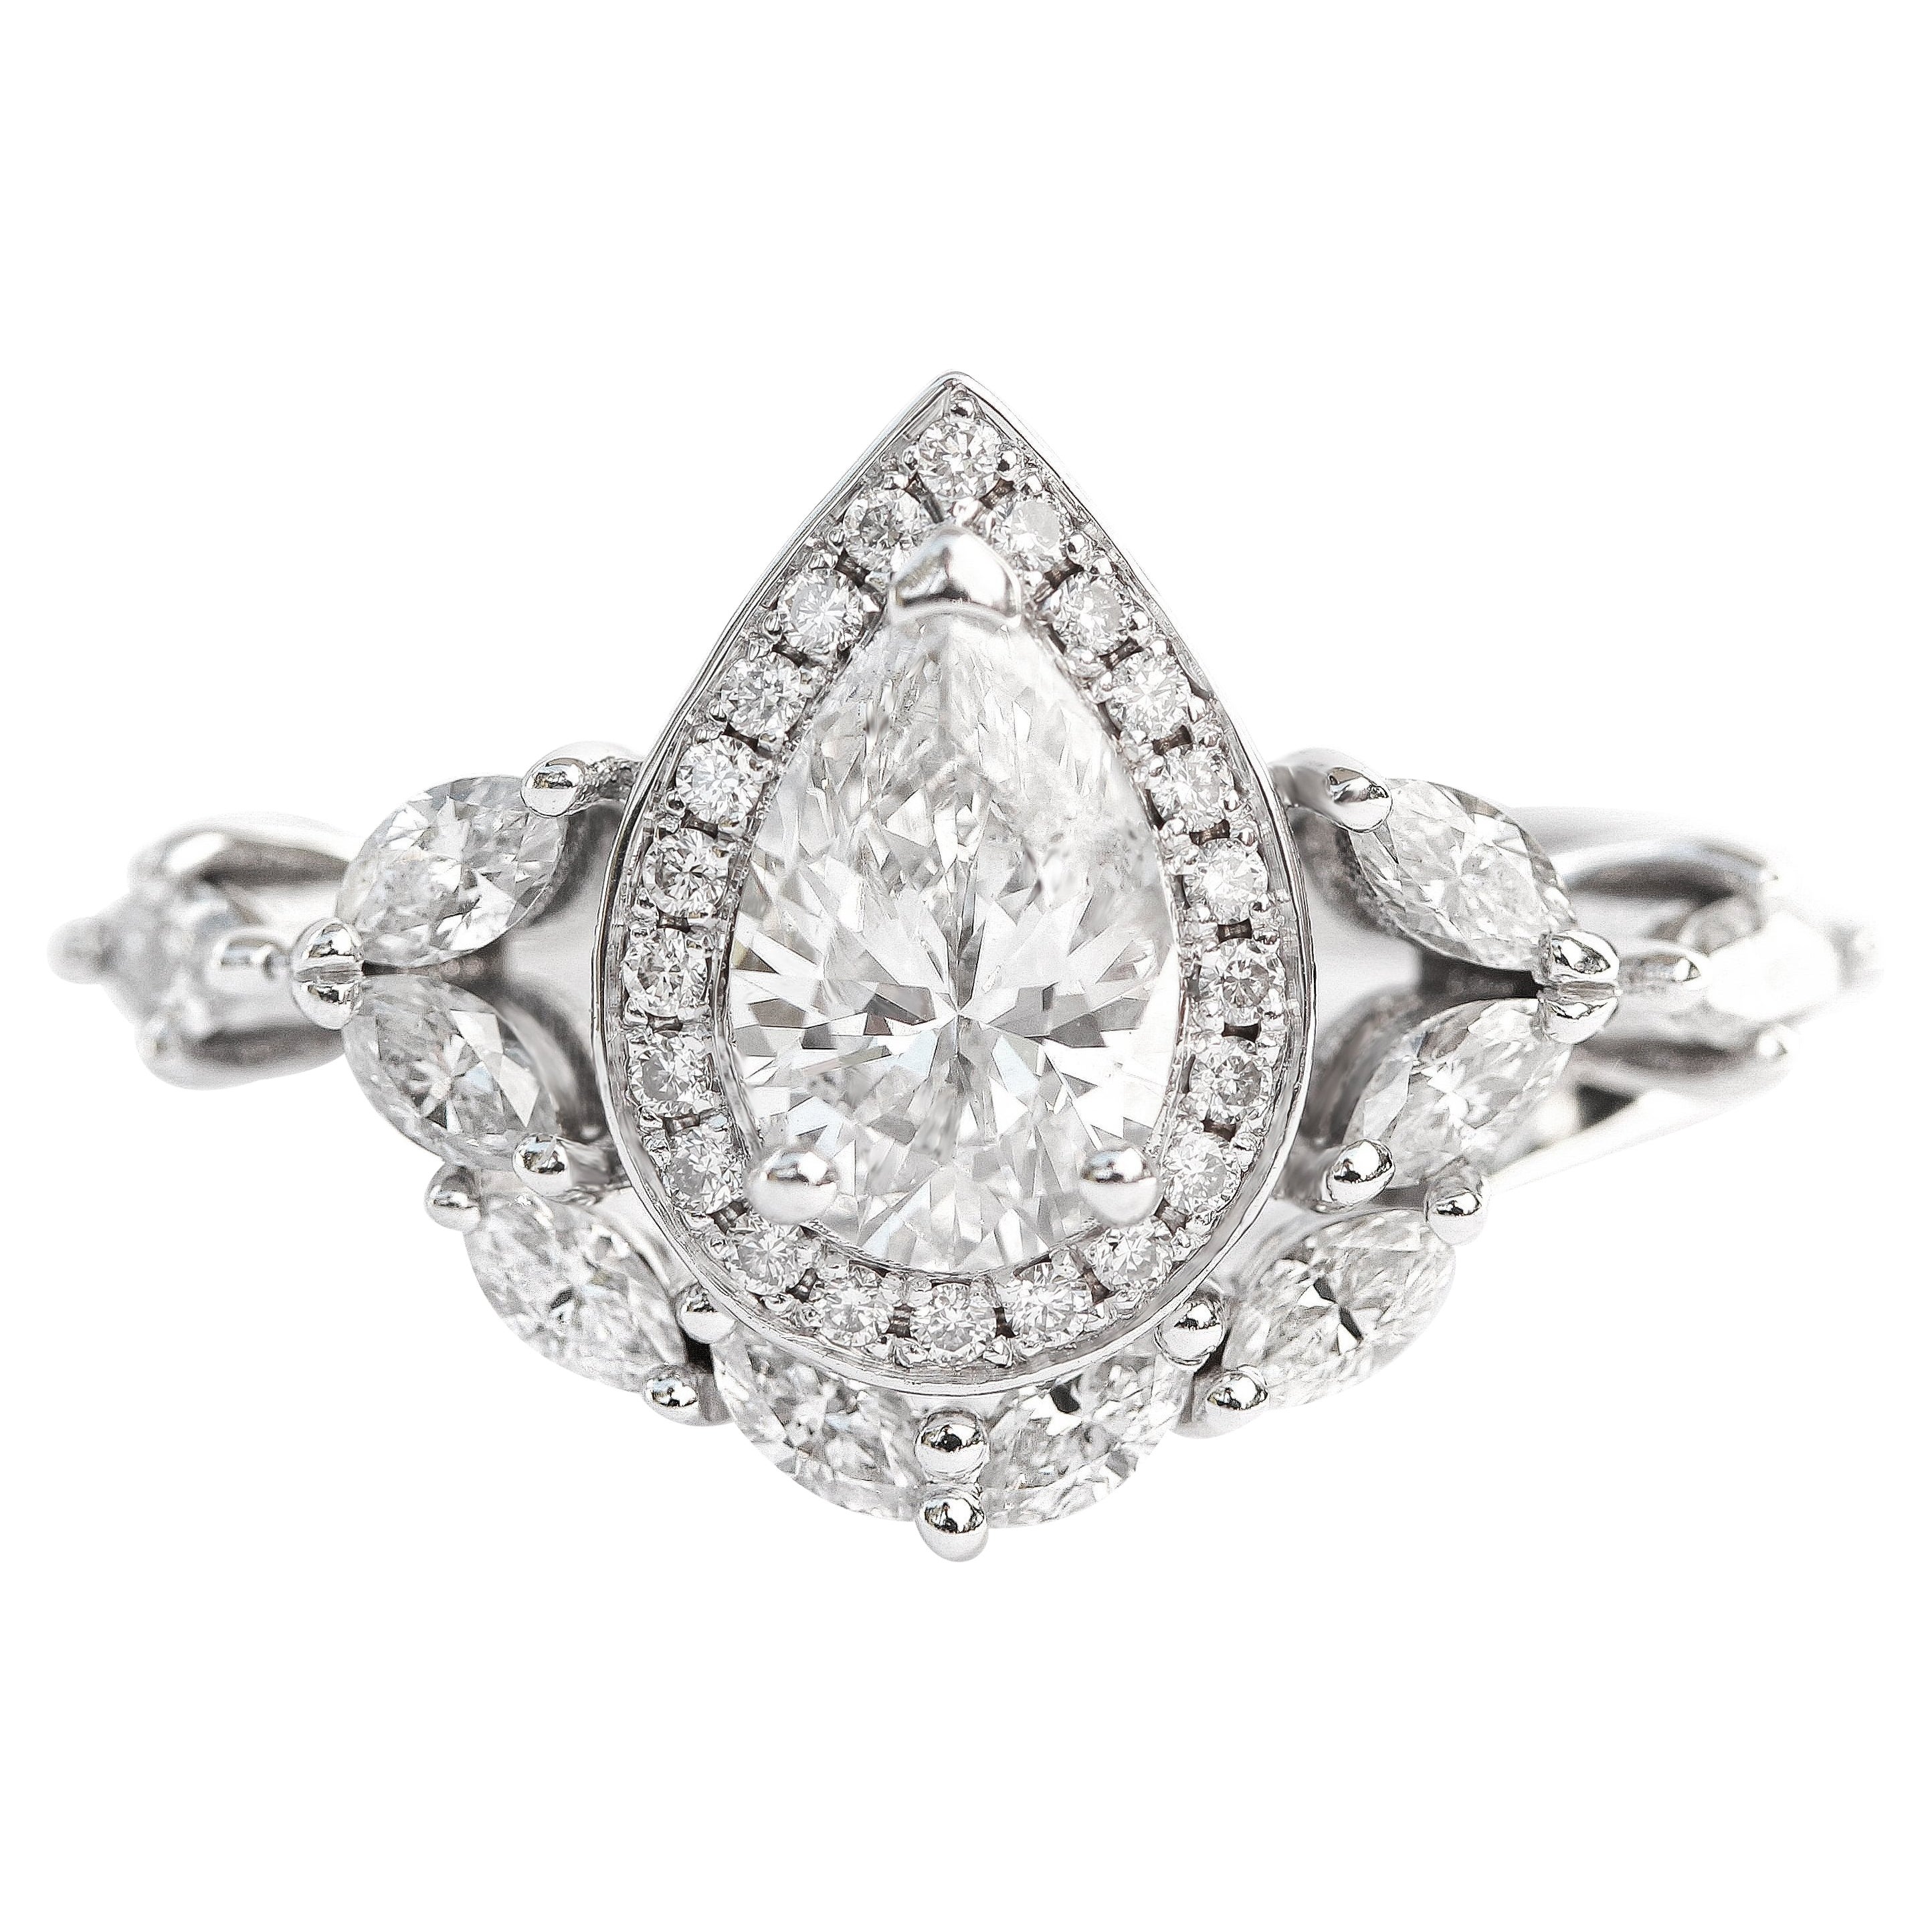 Unique Pear Diamond Halo Engagement Two Rings Set "Muse"